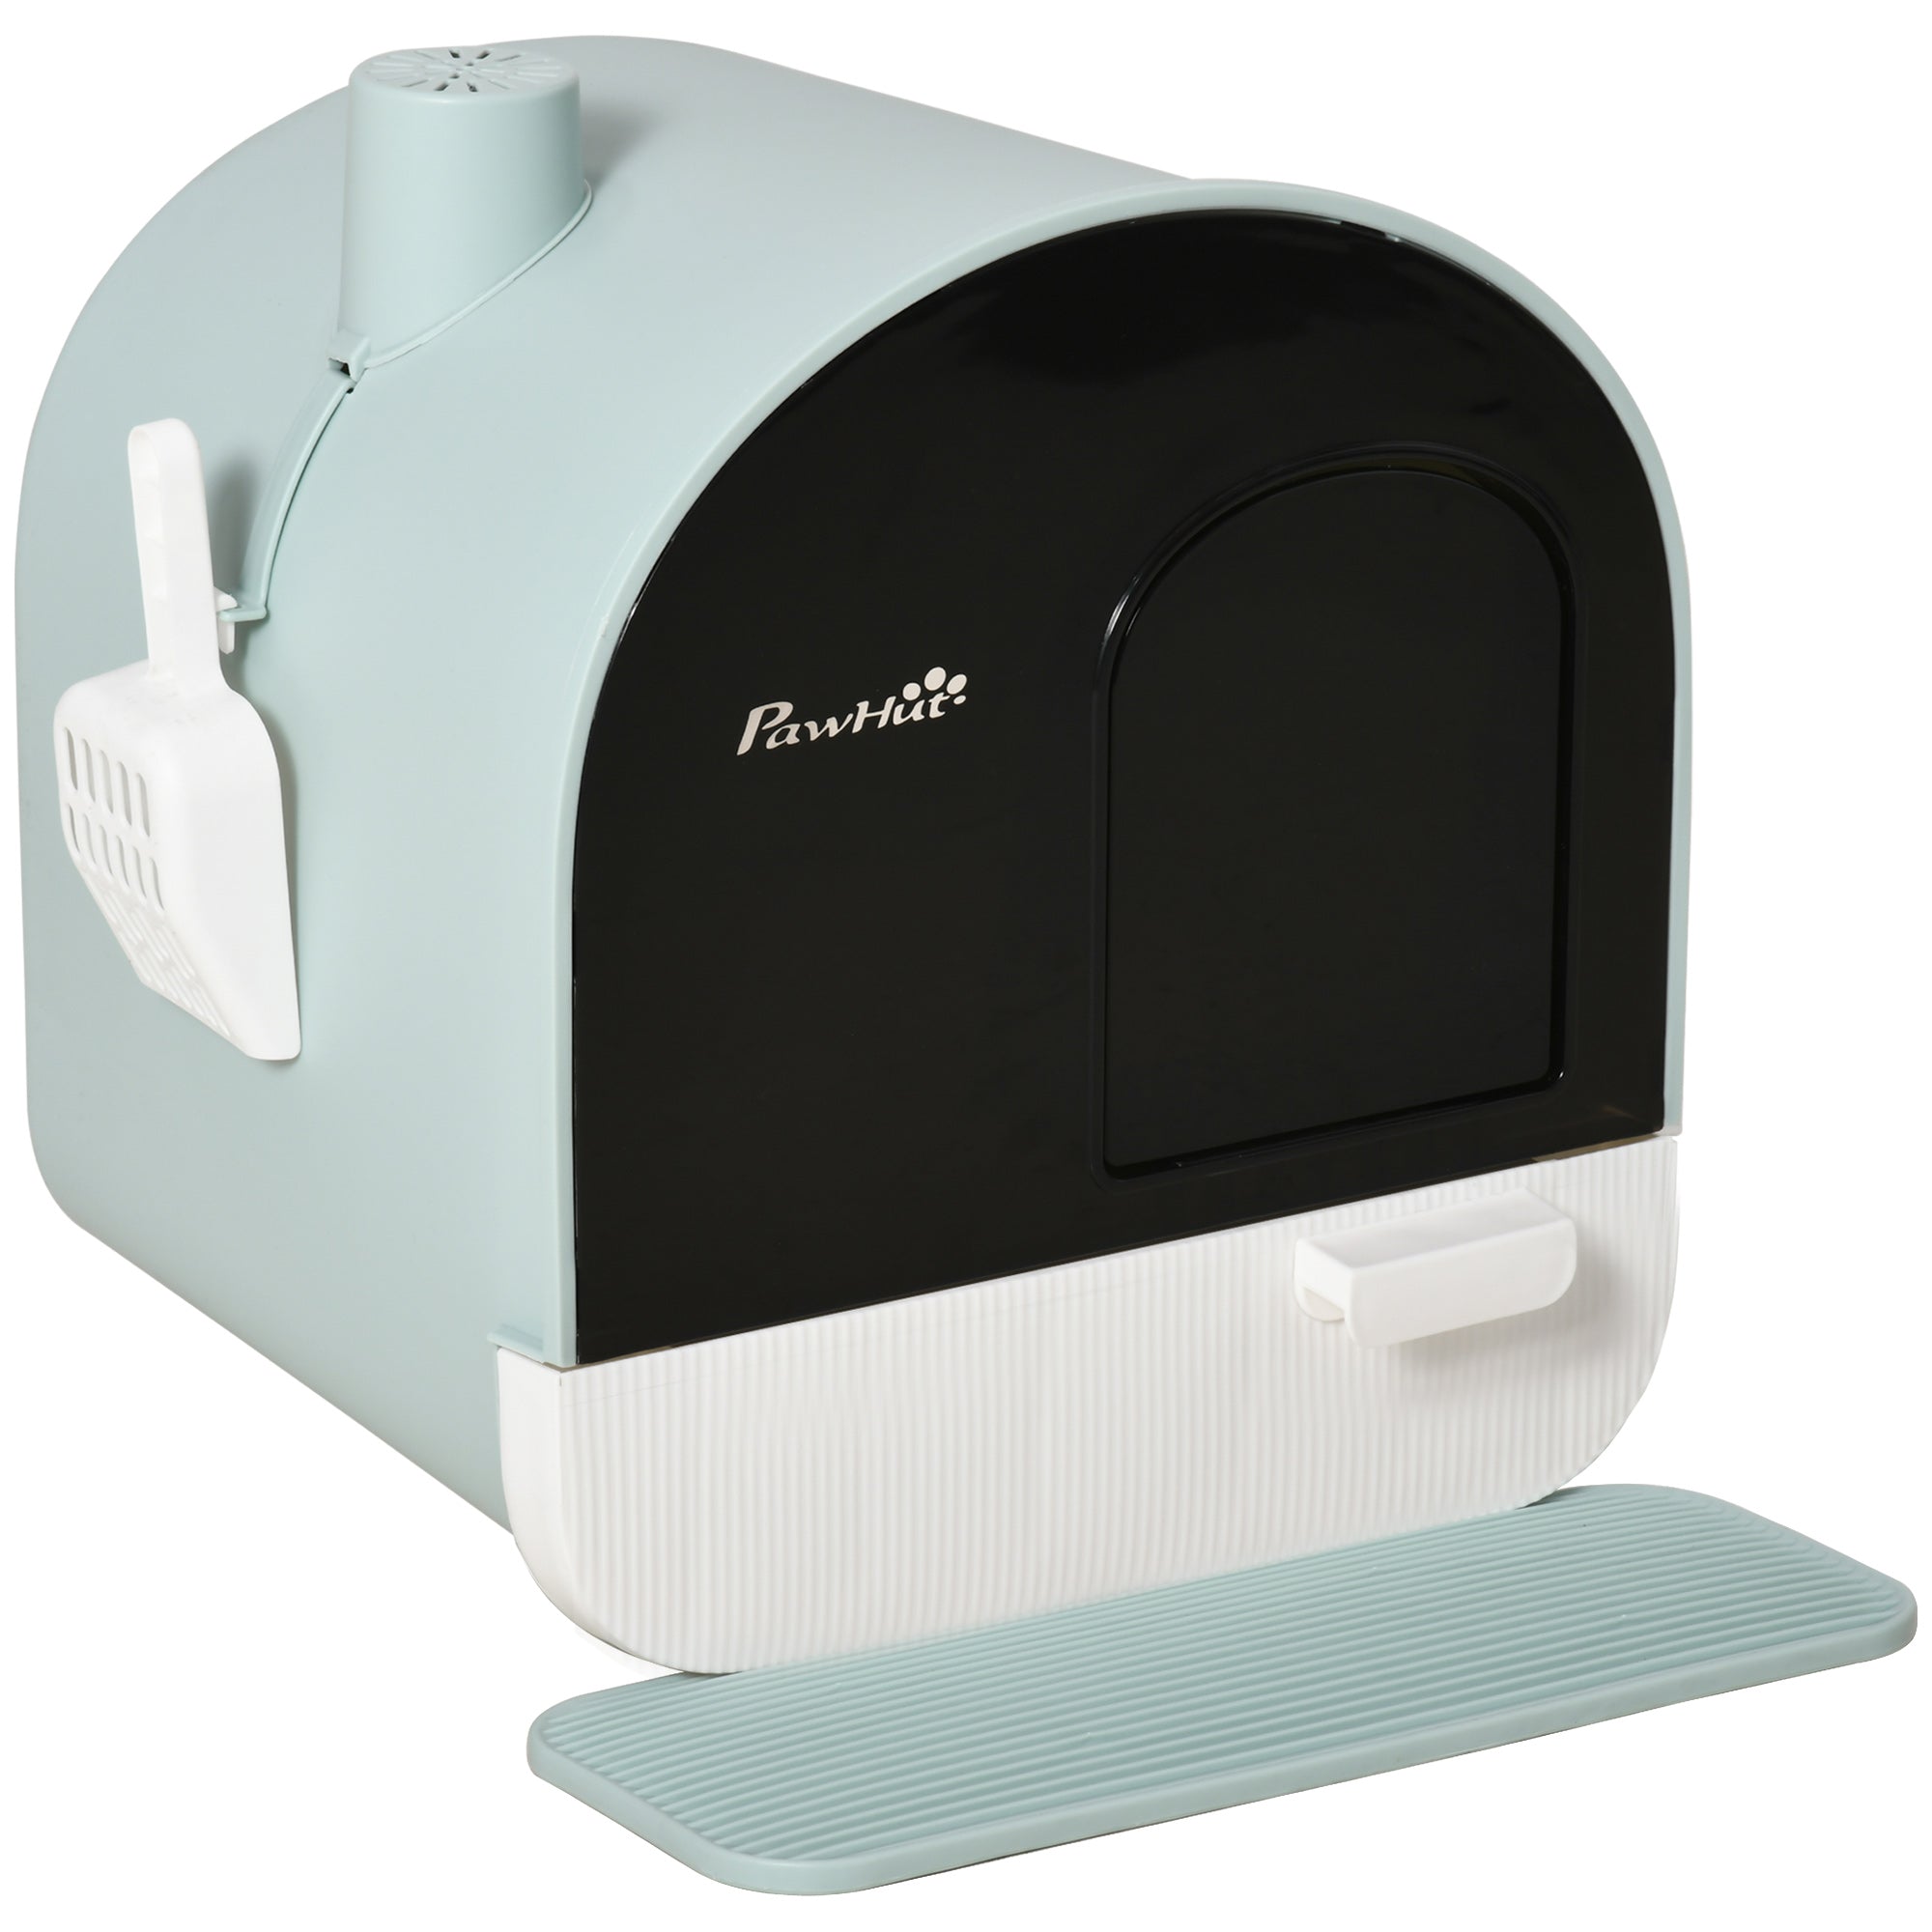 Enclosed Cat Litter Box with Filter, Scoop, and Tray - Ideal for Small Cats, PawHut, Green